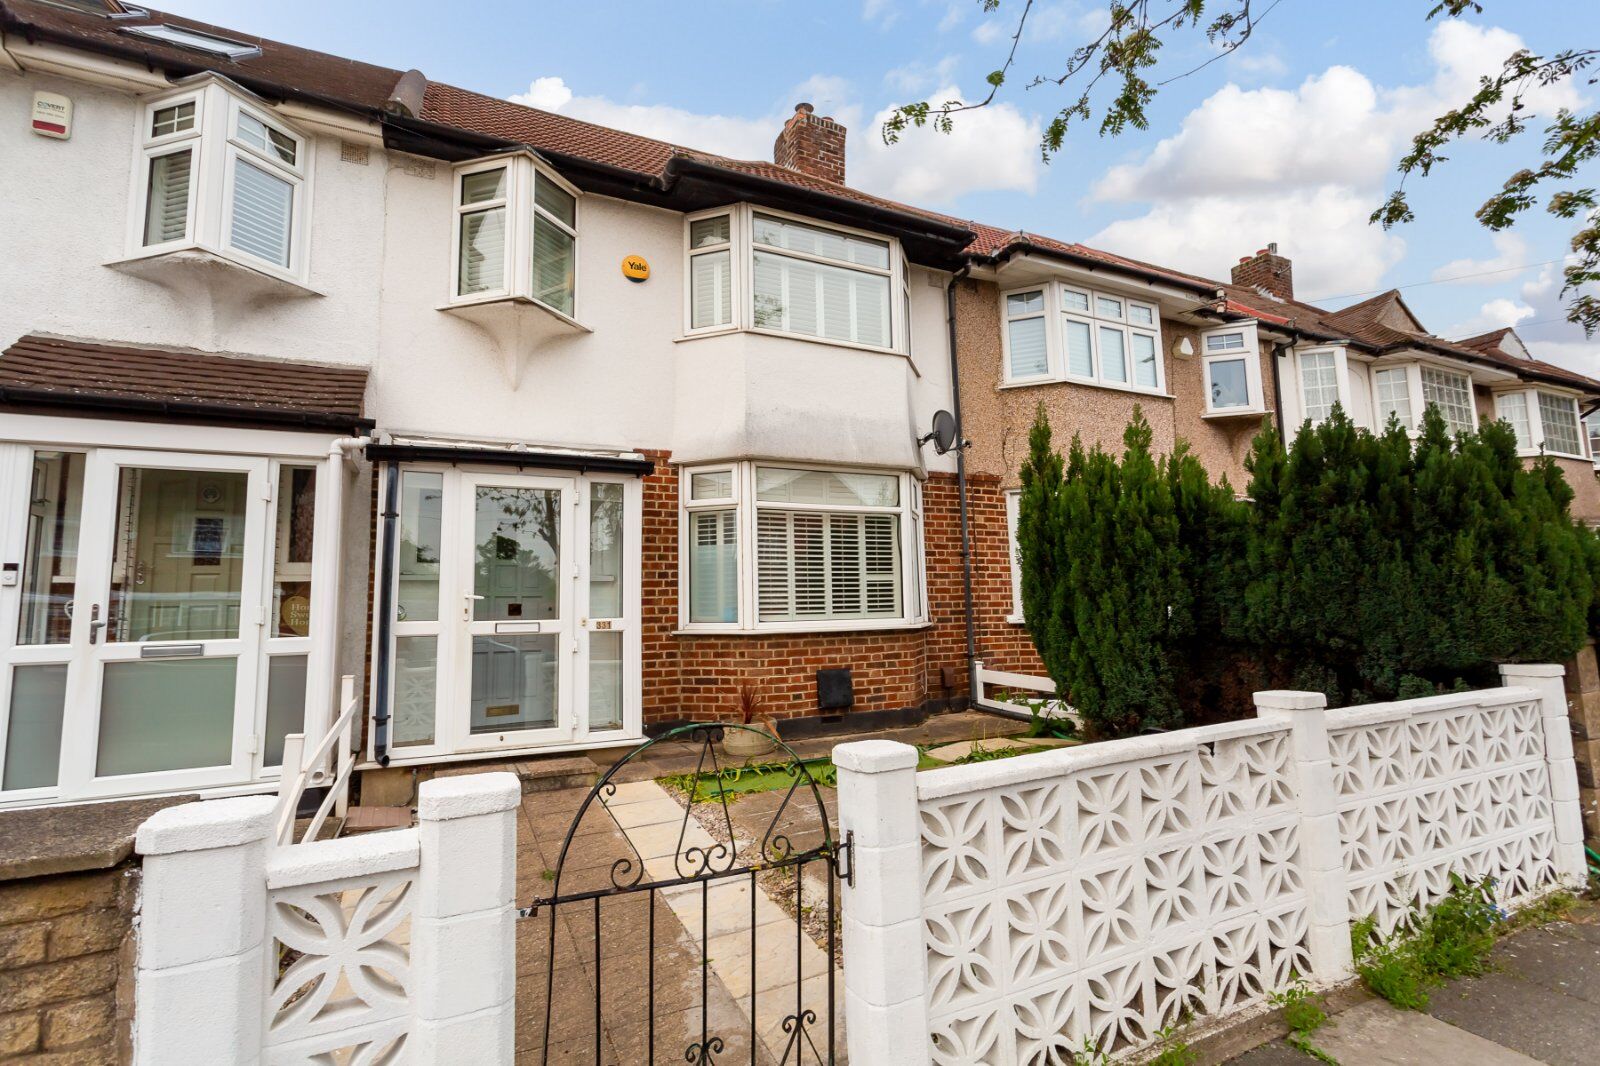 3 bedroom mid terraced house for sale Tamworth Lane, Mitcham, CR4, main image